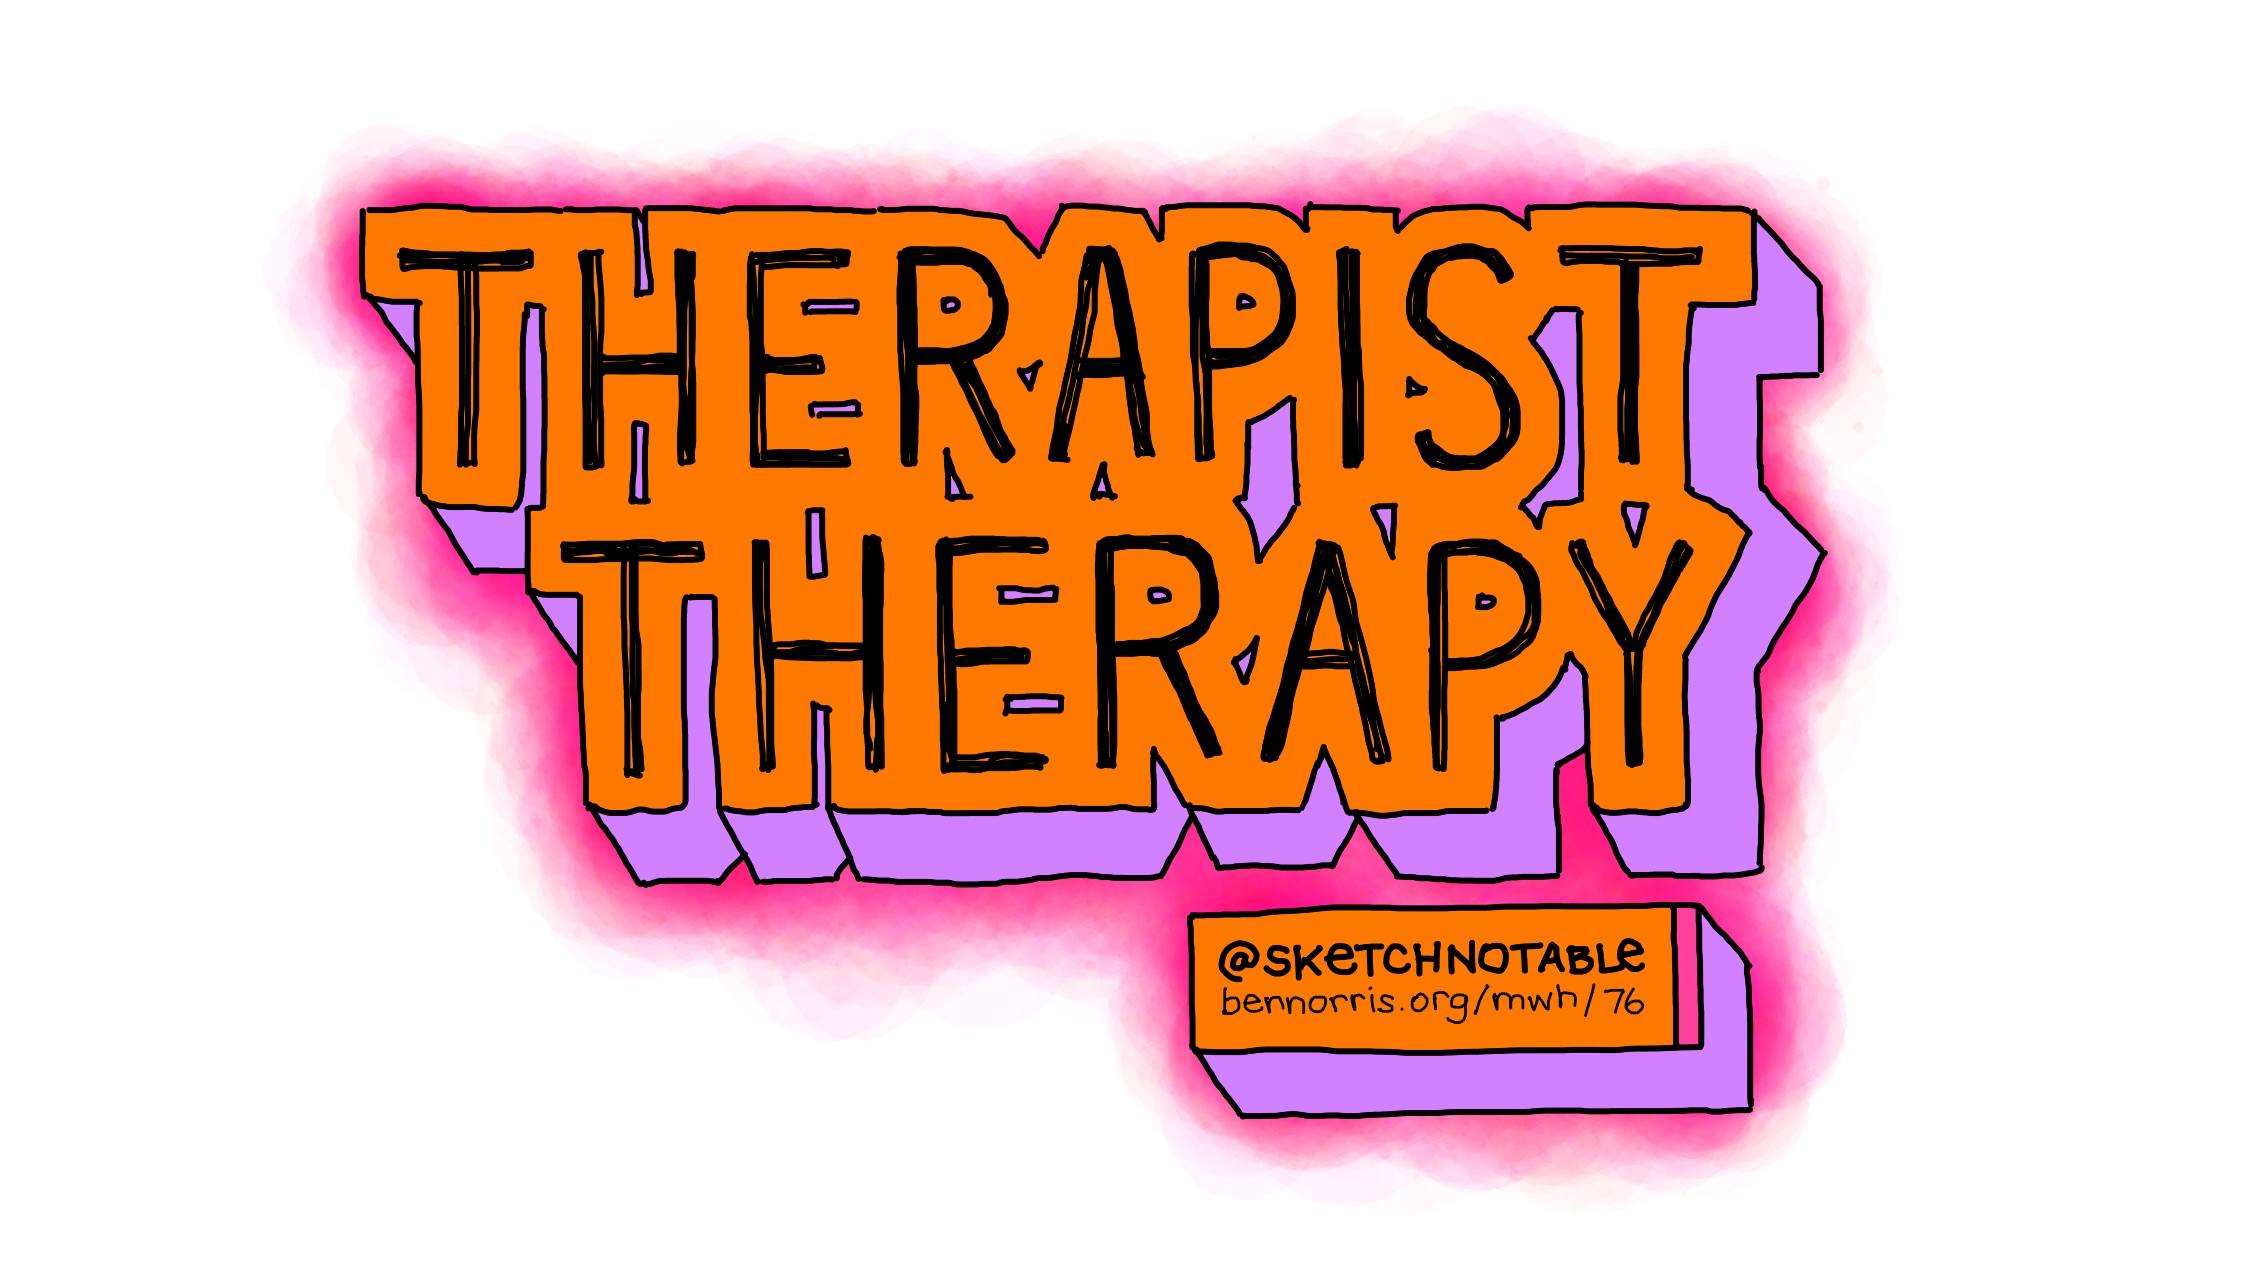 Therapist therapy